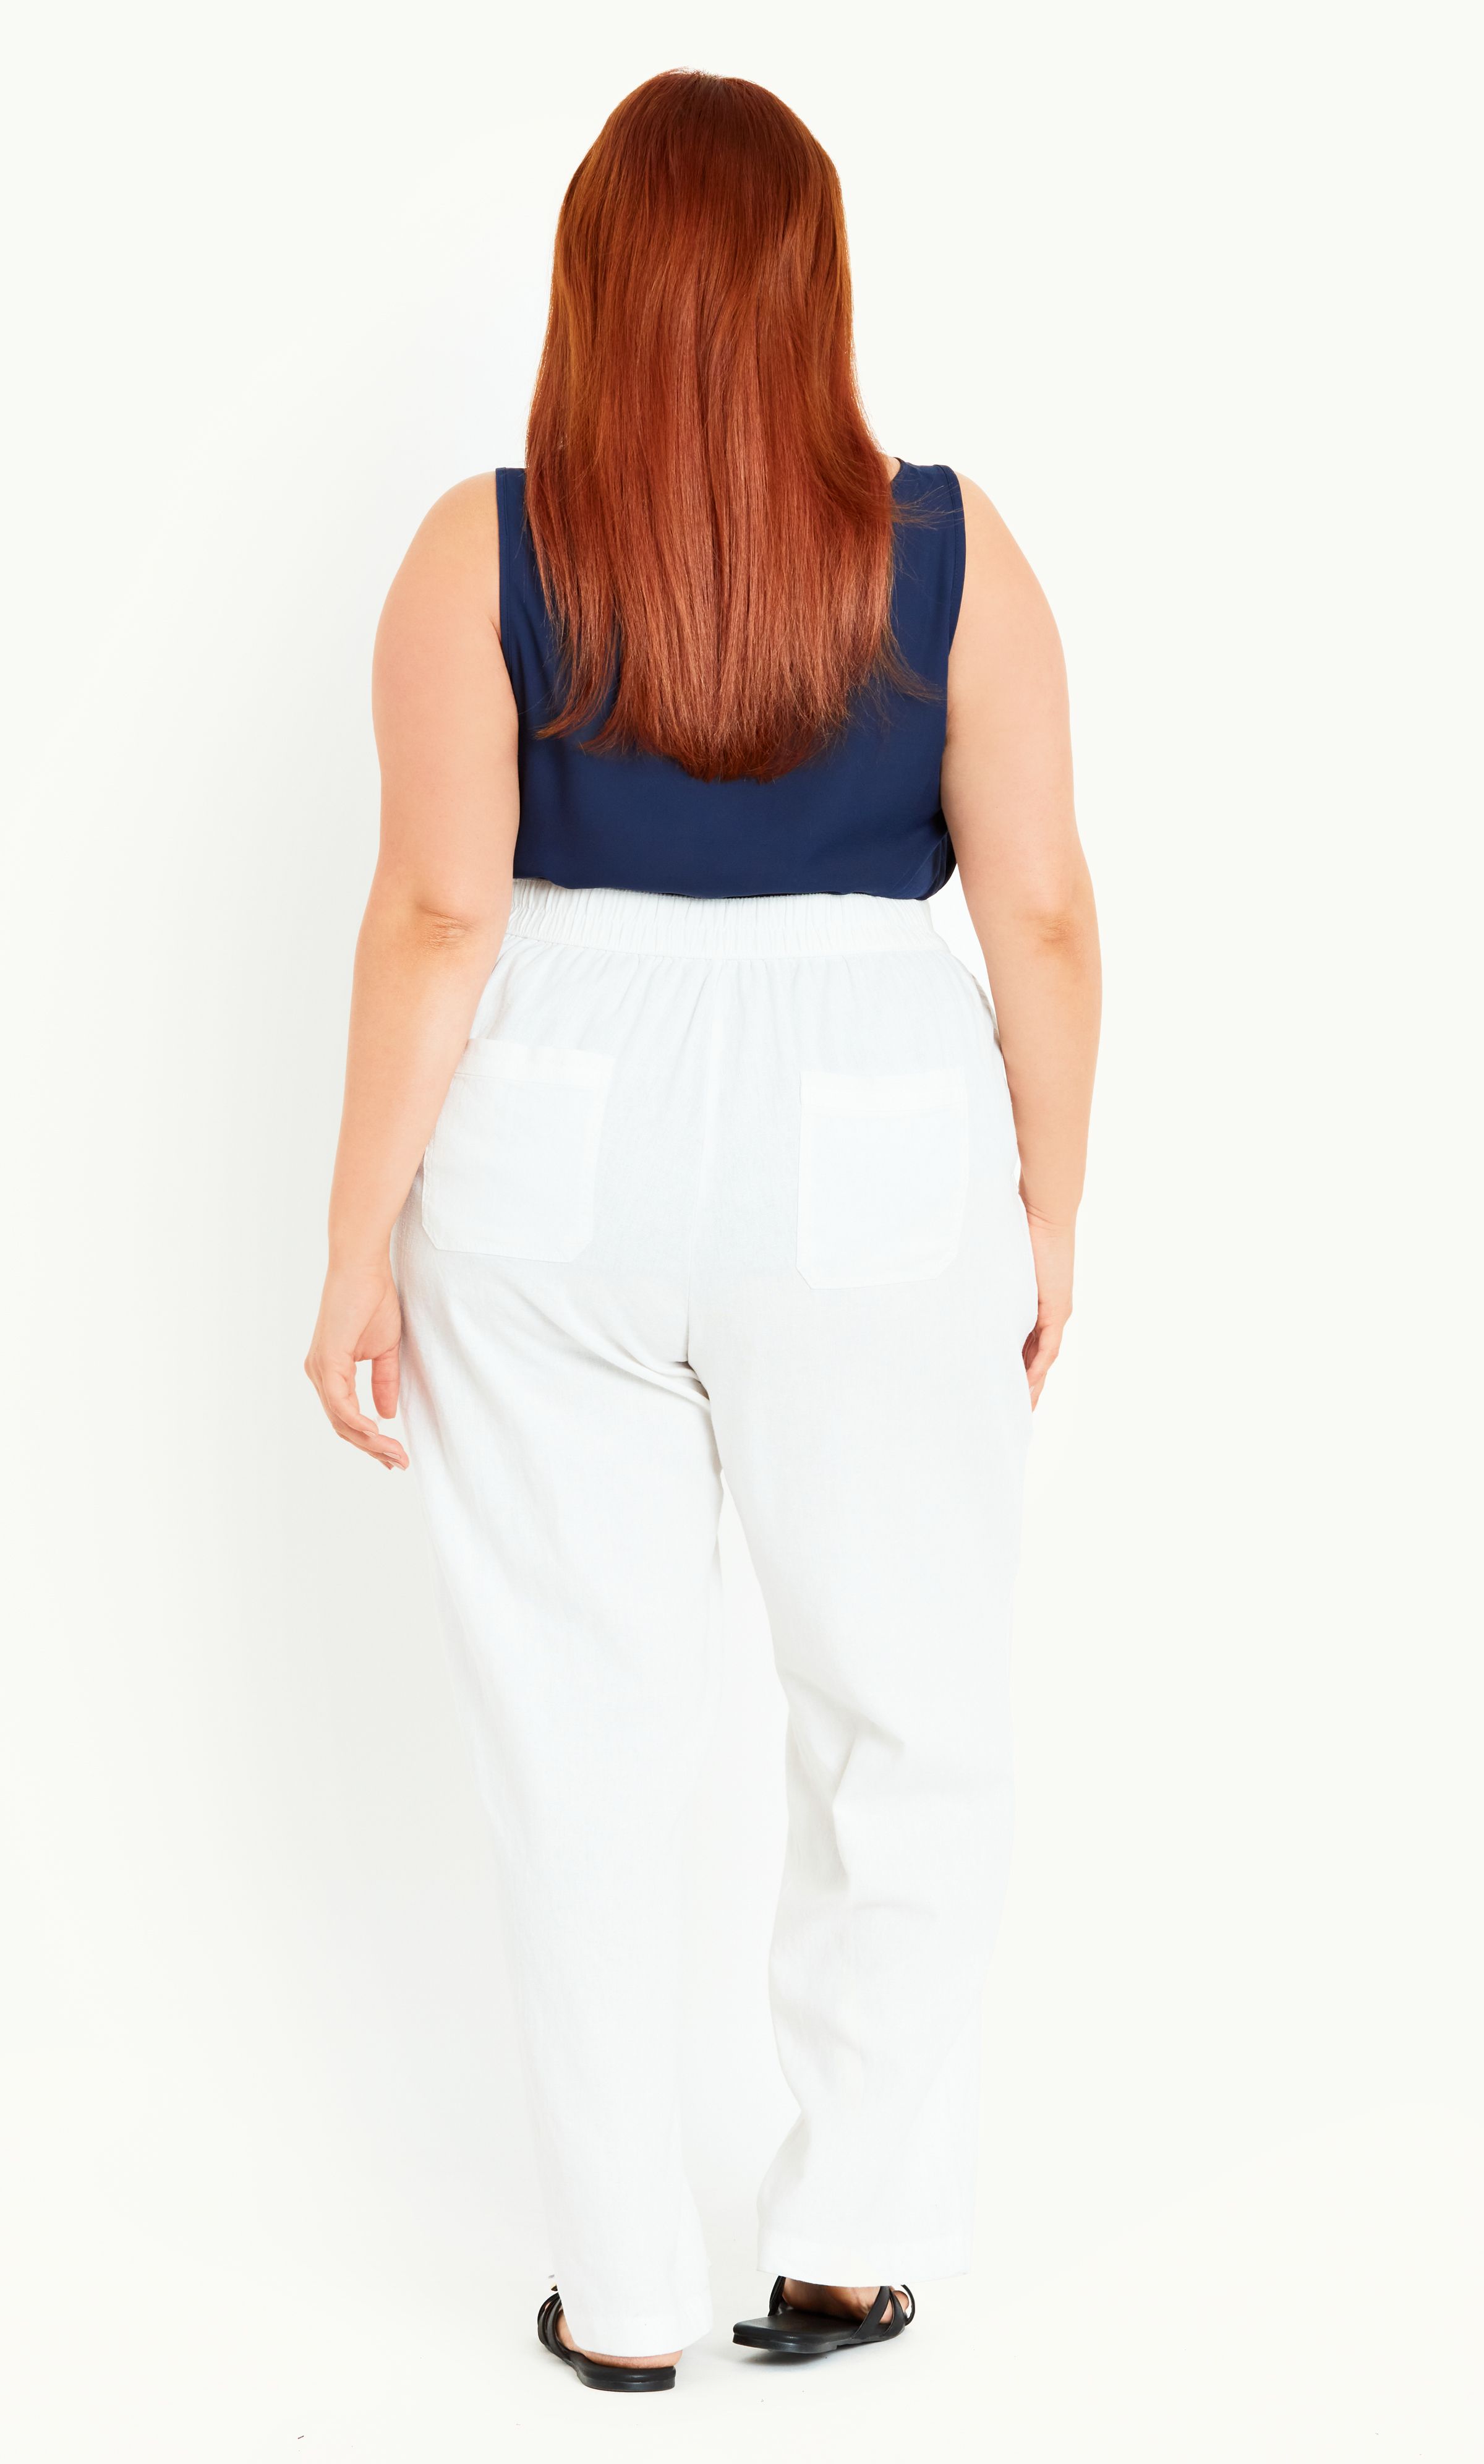 Perfect crisp, summer style with the Linen Blend Trouser. Featuring functional pockets, a drawstring waist and a straight leg fit, these breezy trousers are the ultimate blend of comfort and style. Key Features Include: - Drawstring waist with elasticated back - Functional side & back pockets - Linen blend fabrication - Relaxed wide leg fit - Full length Add a pop of colour with a vibrantly printed tee.